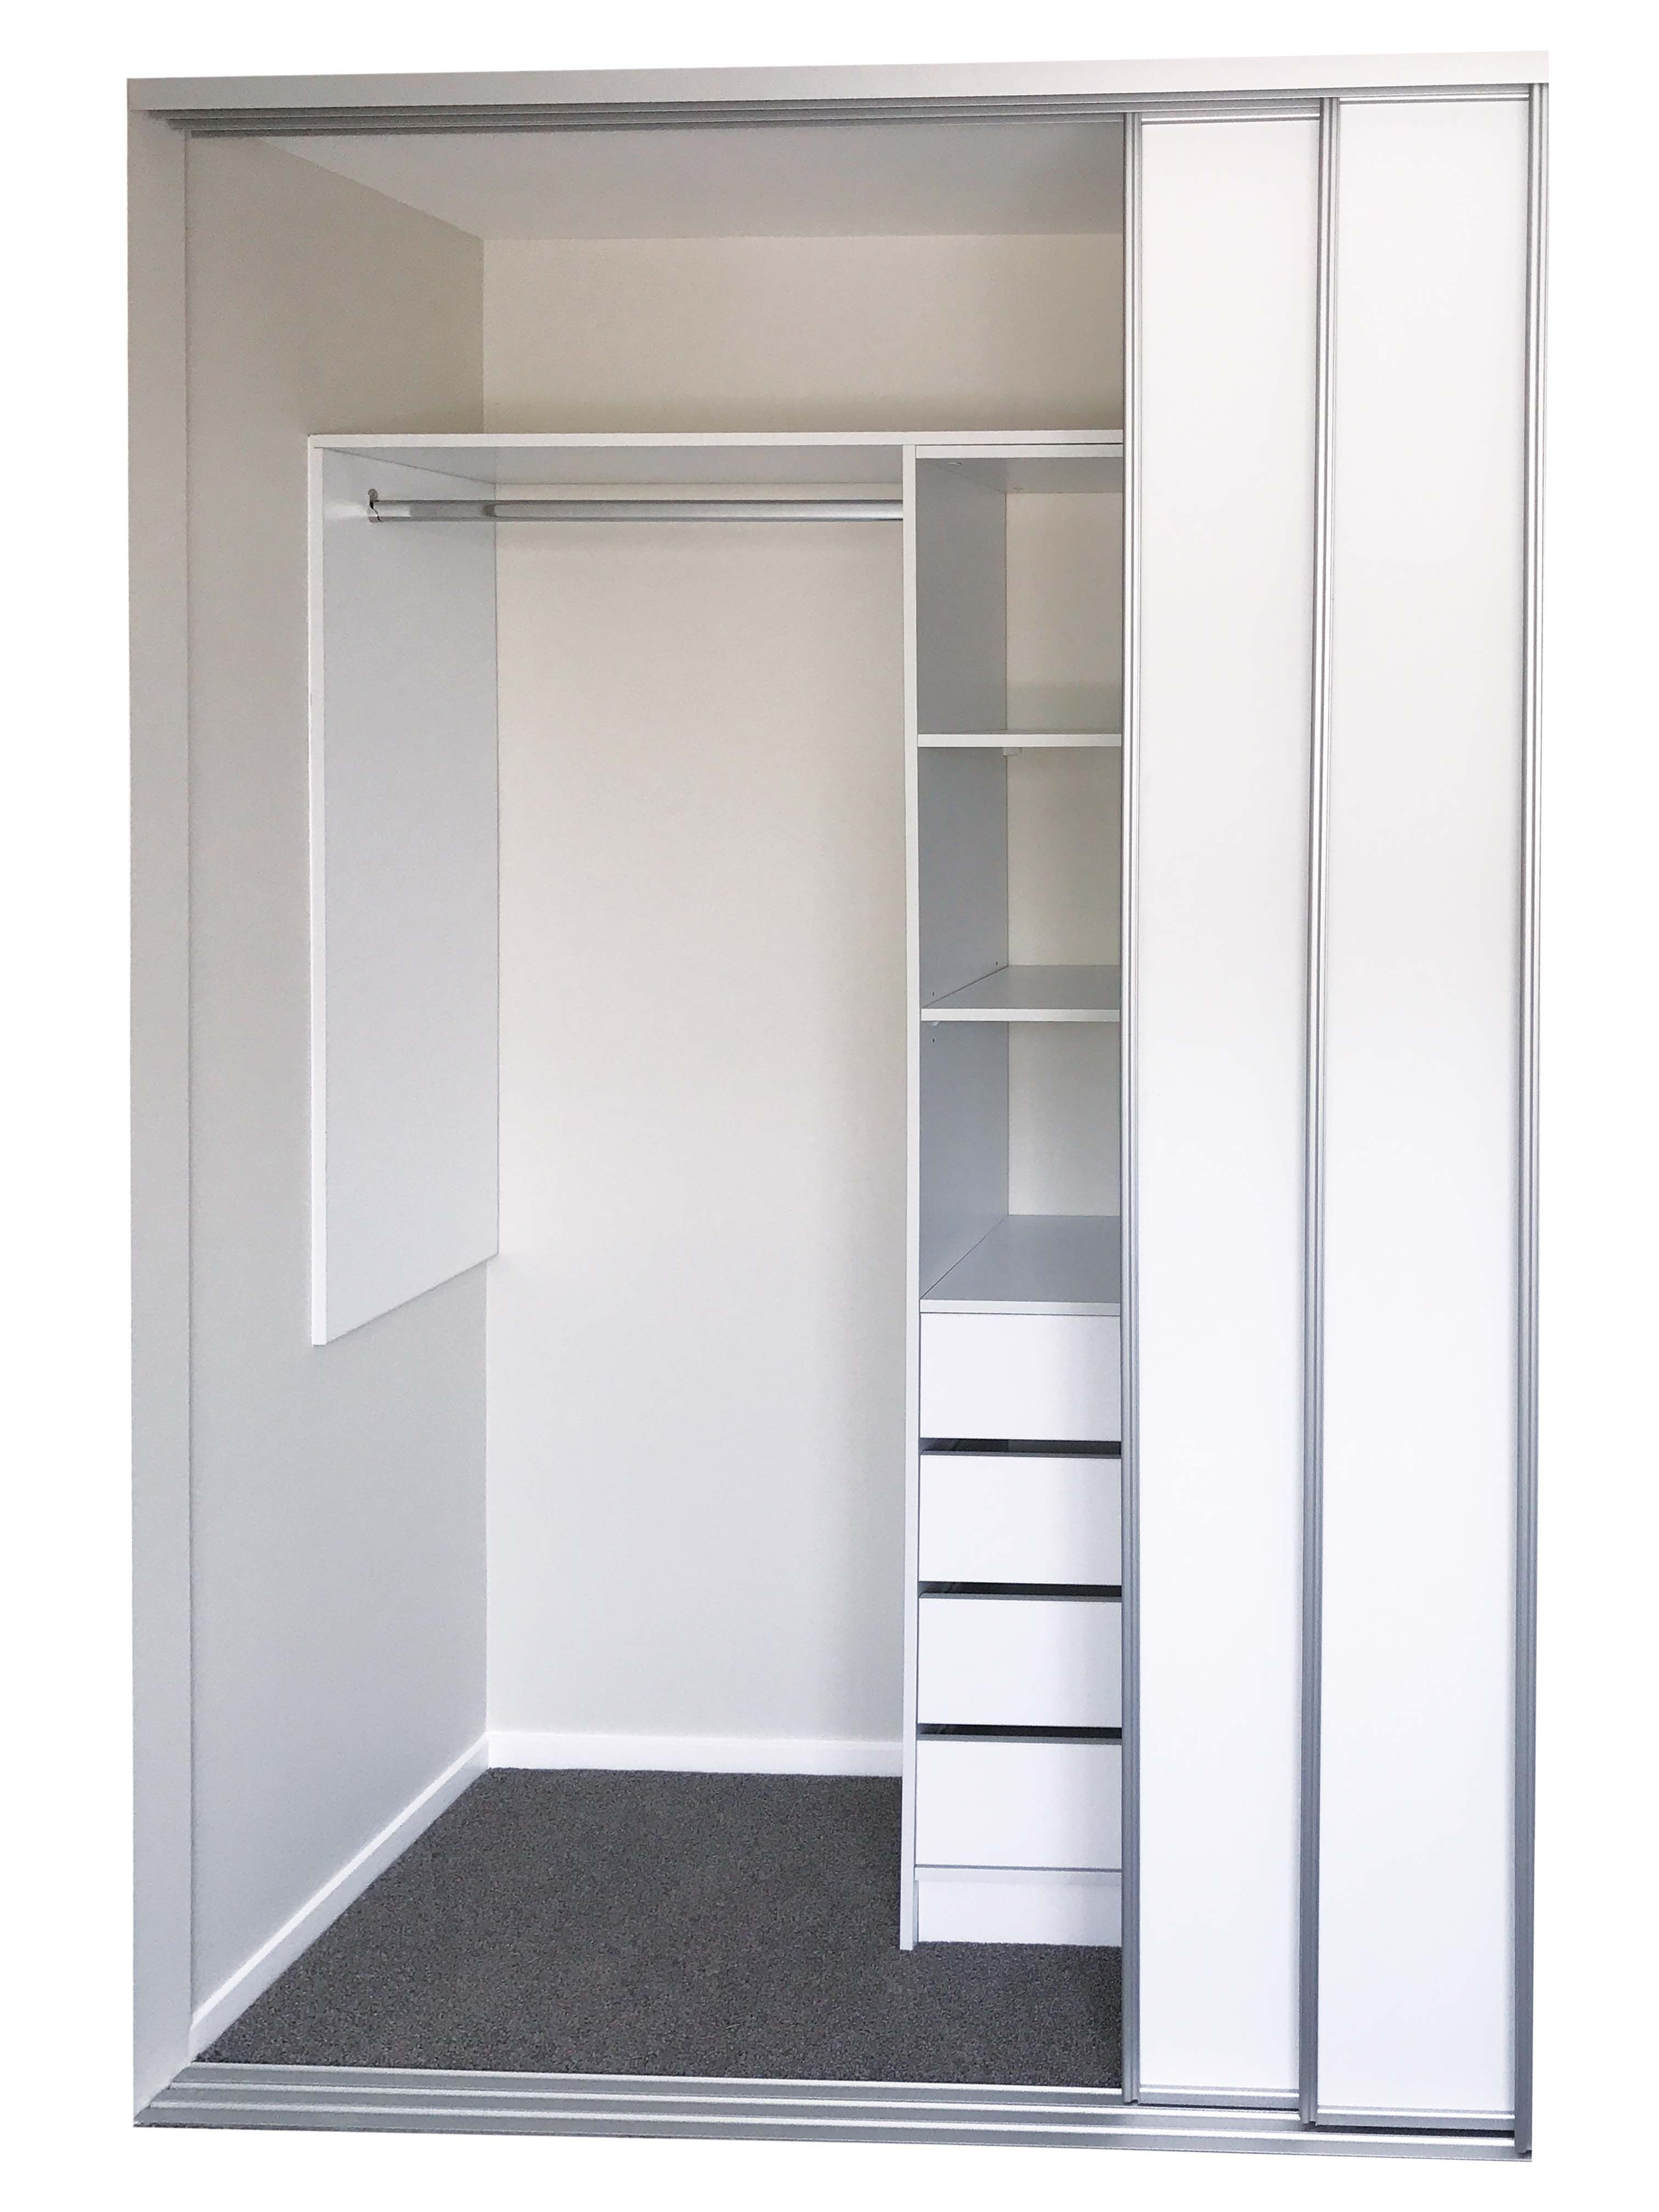 Genesis Modular Floor Standing Wardrobe Shelving | Showerwell Home Products Intended For 3 Shelving Towers Wardrobes (Gallery 4 of 20)